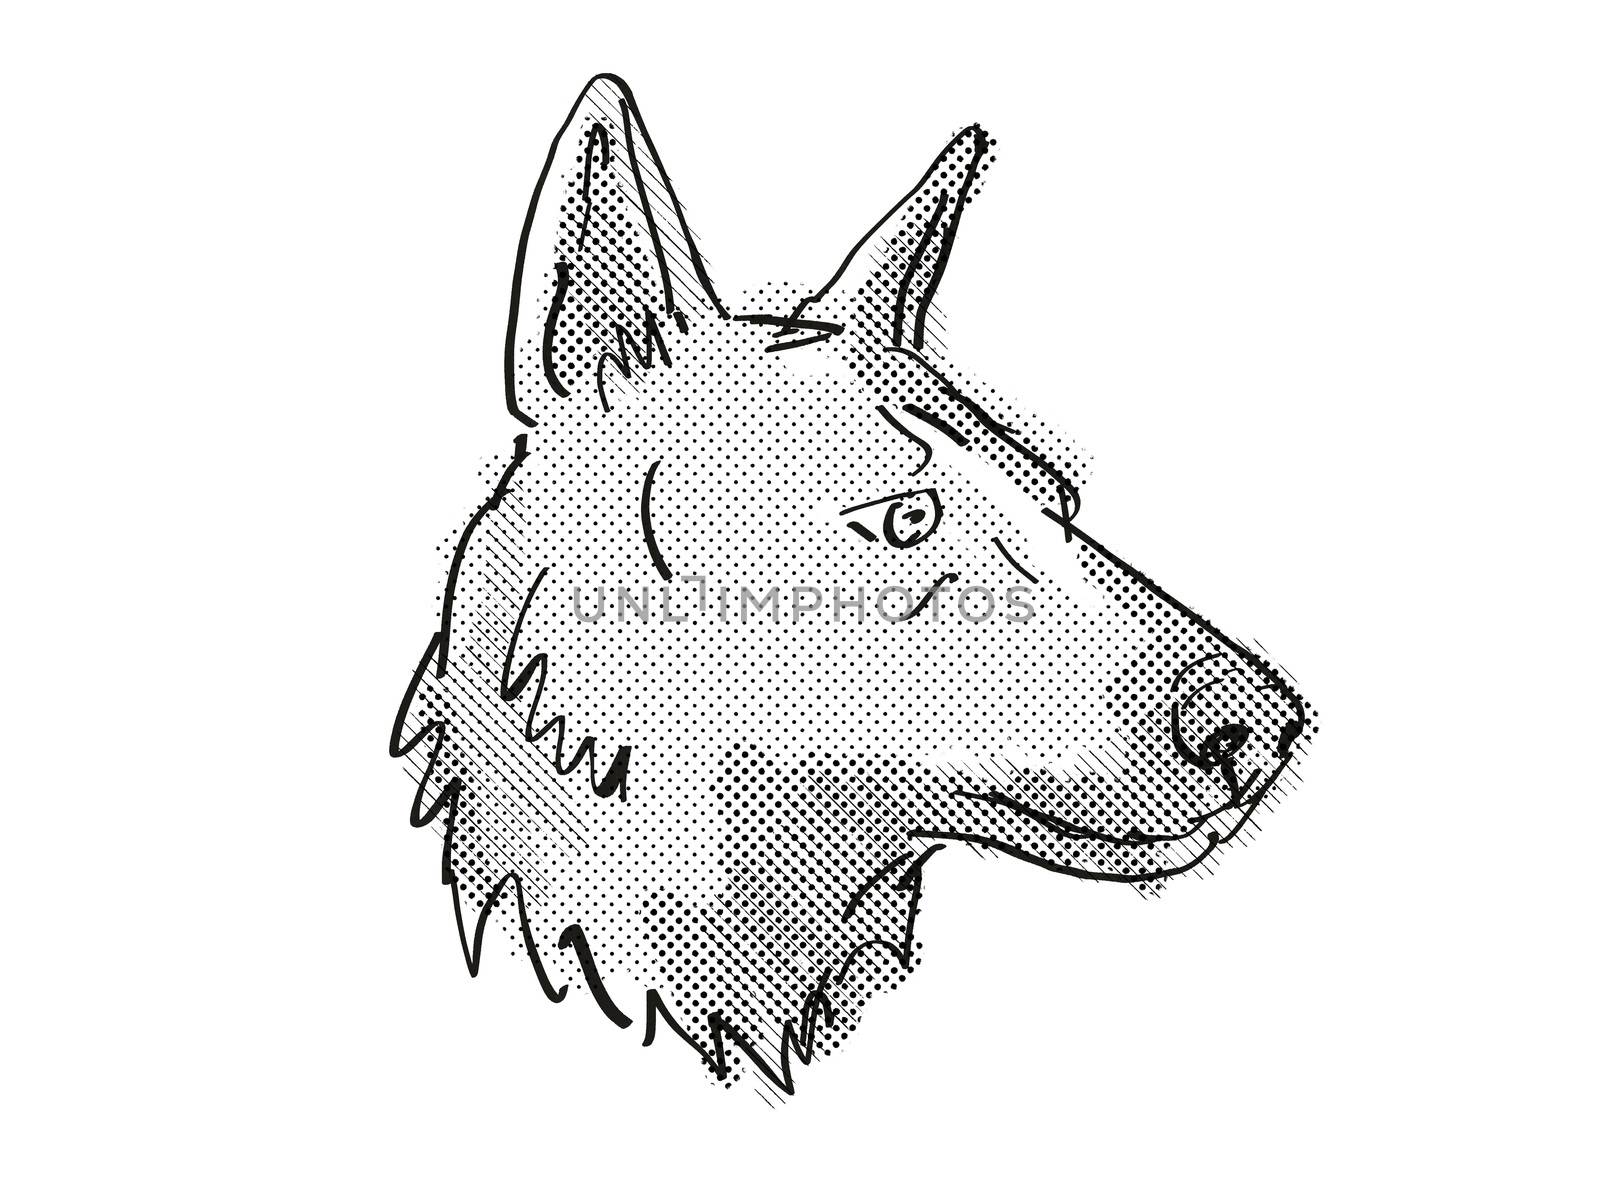 Retro cartoon style drawing of head of a German Shepherd, a domestic dog or canine breed on isolated white background done in black and white.